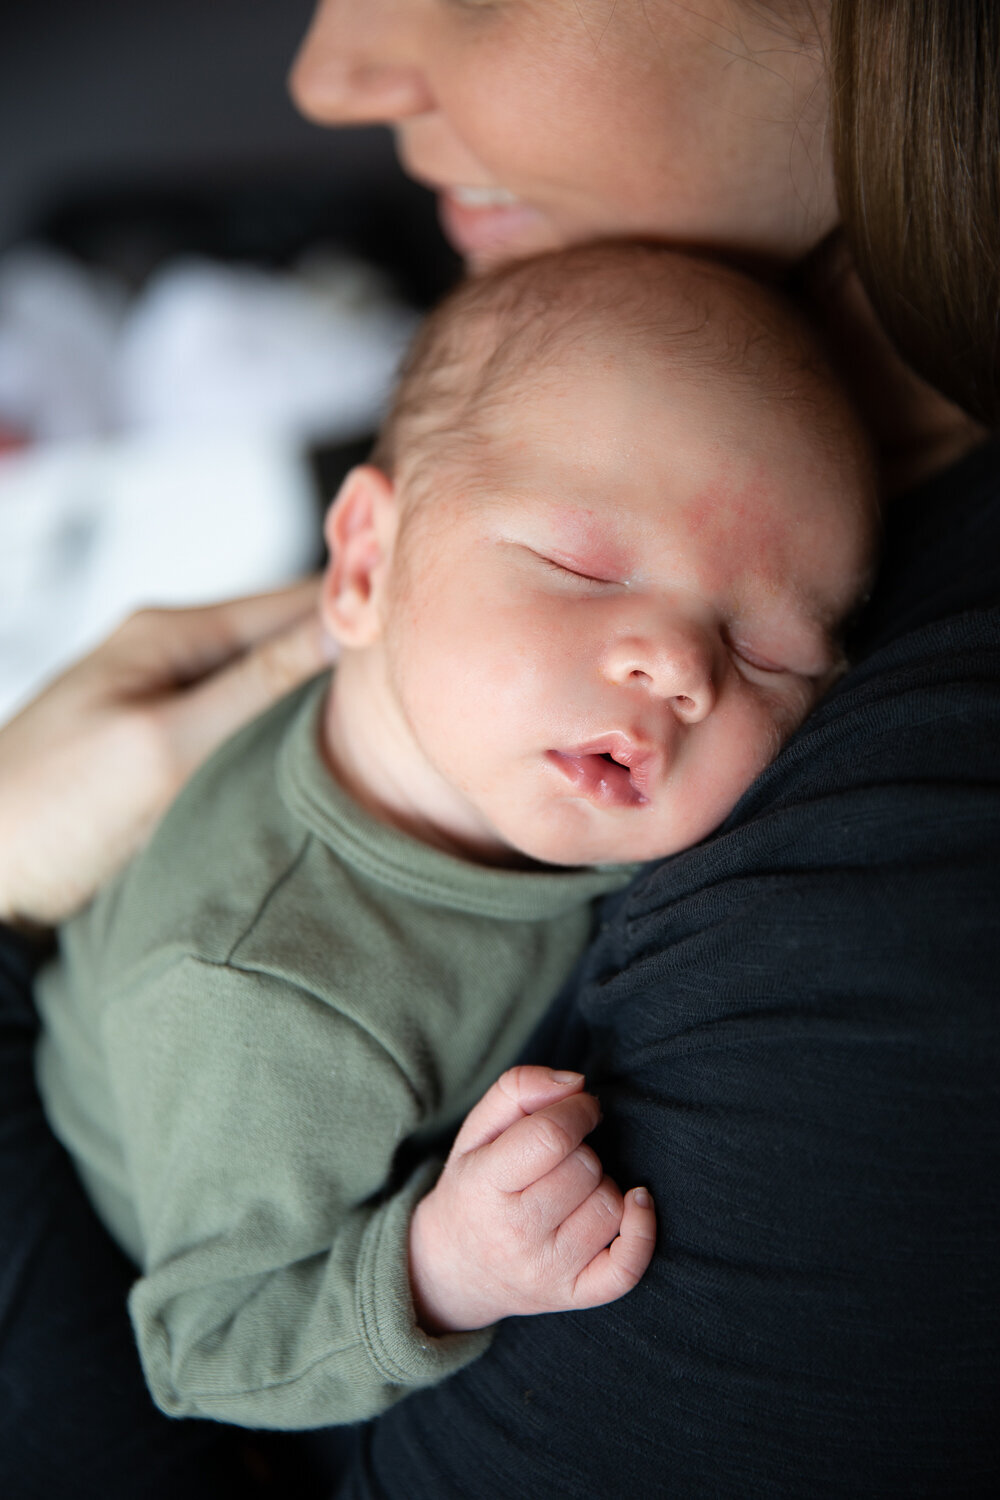 karen-stone-photography-in-home-newborn-baby-session-photographer-hester-mulreany-6